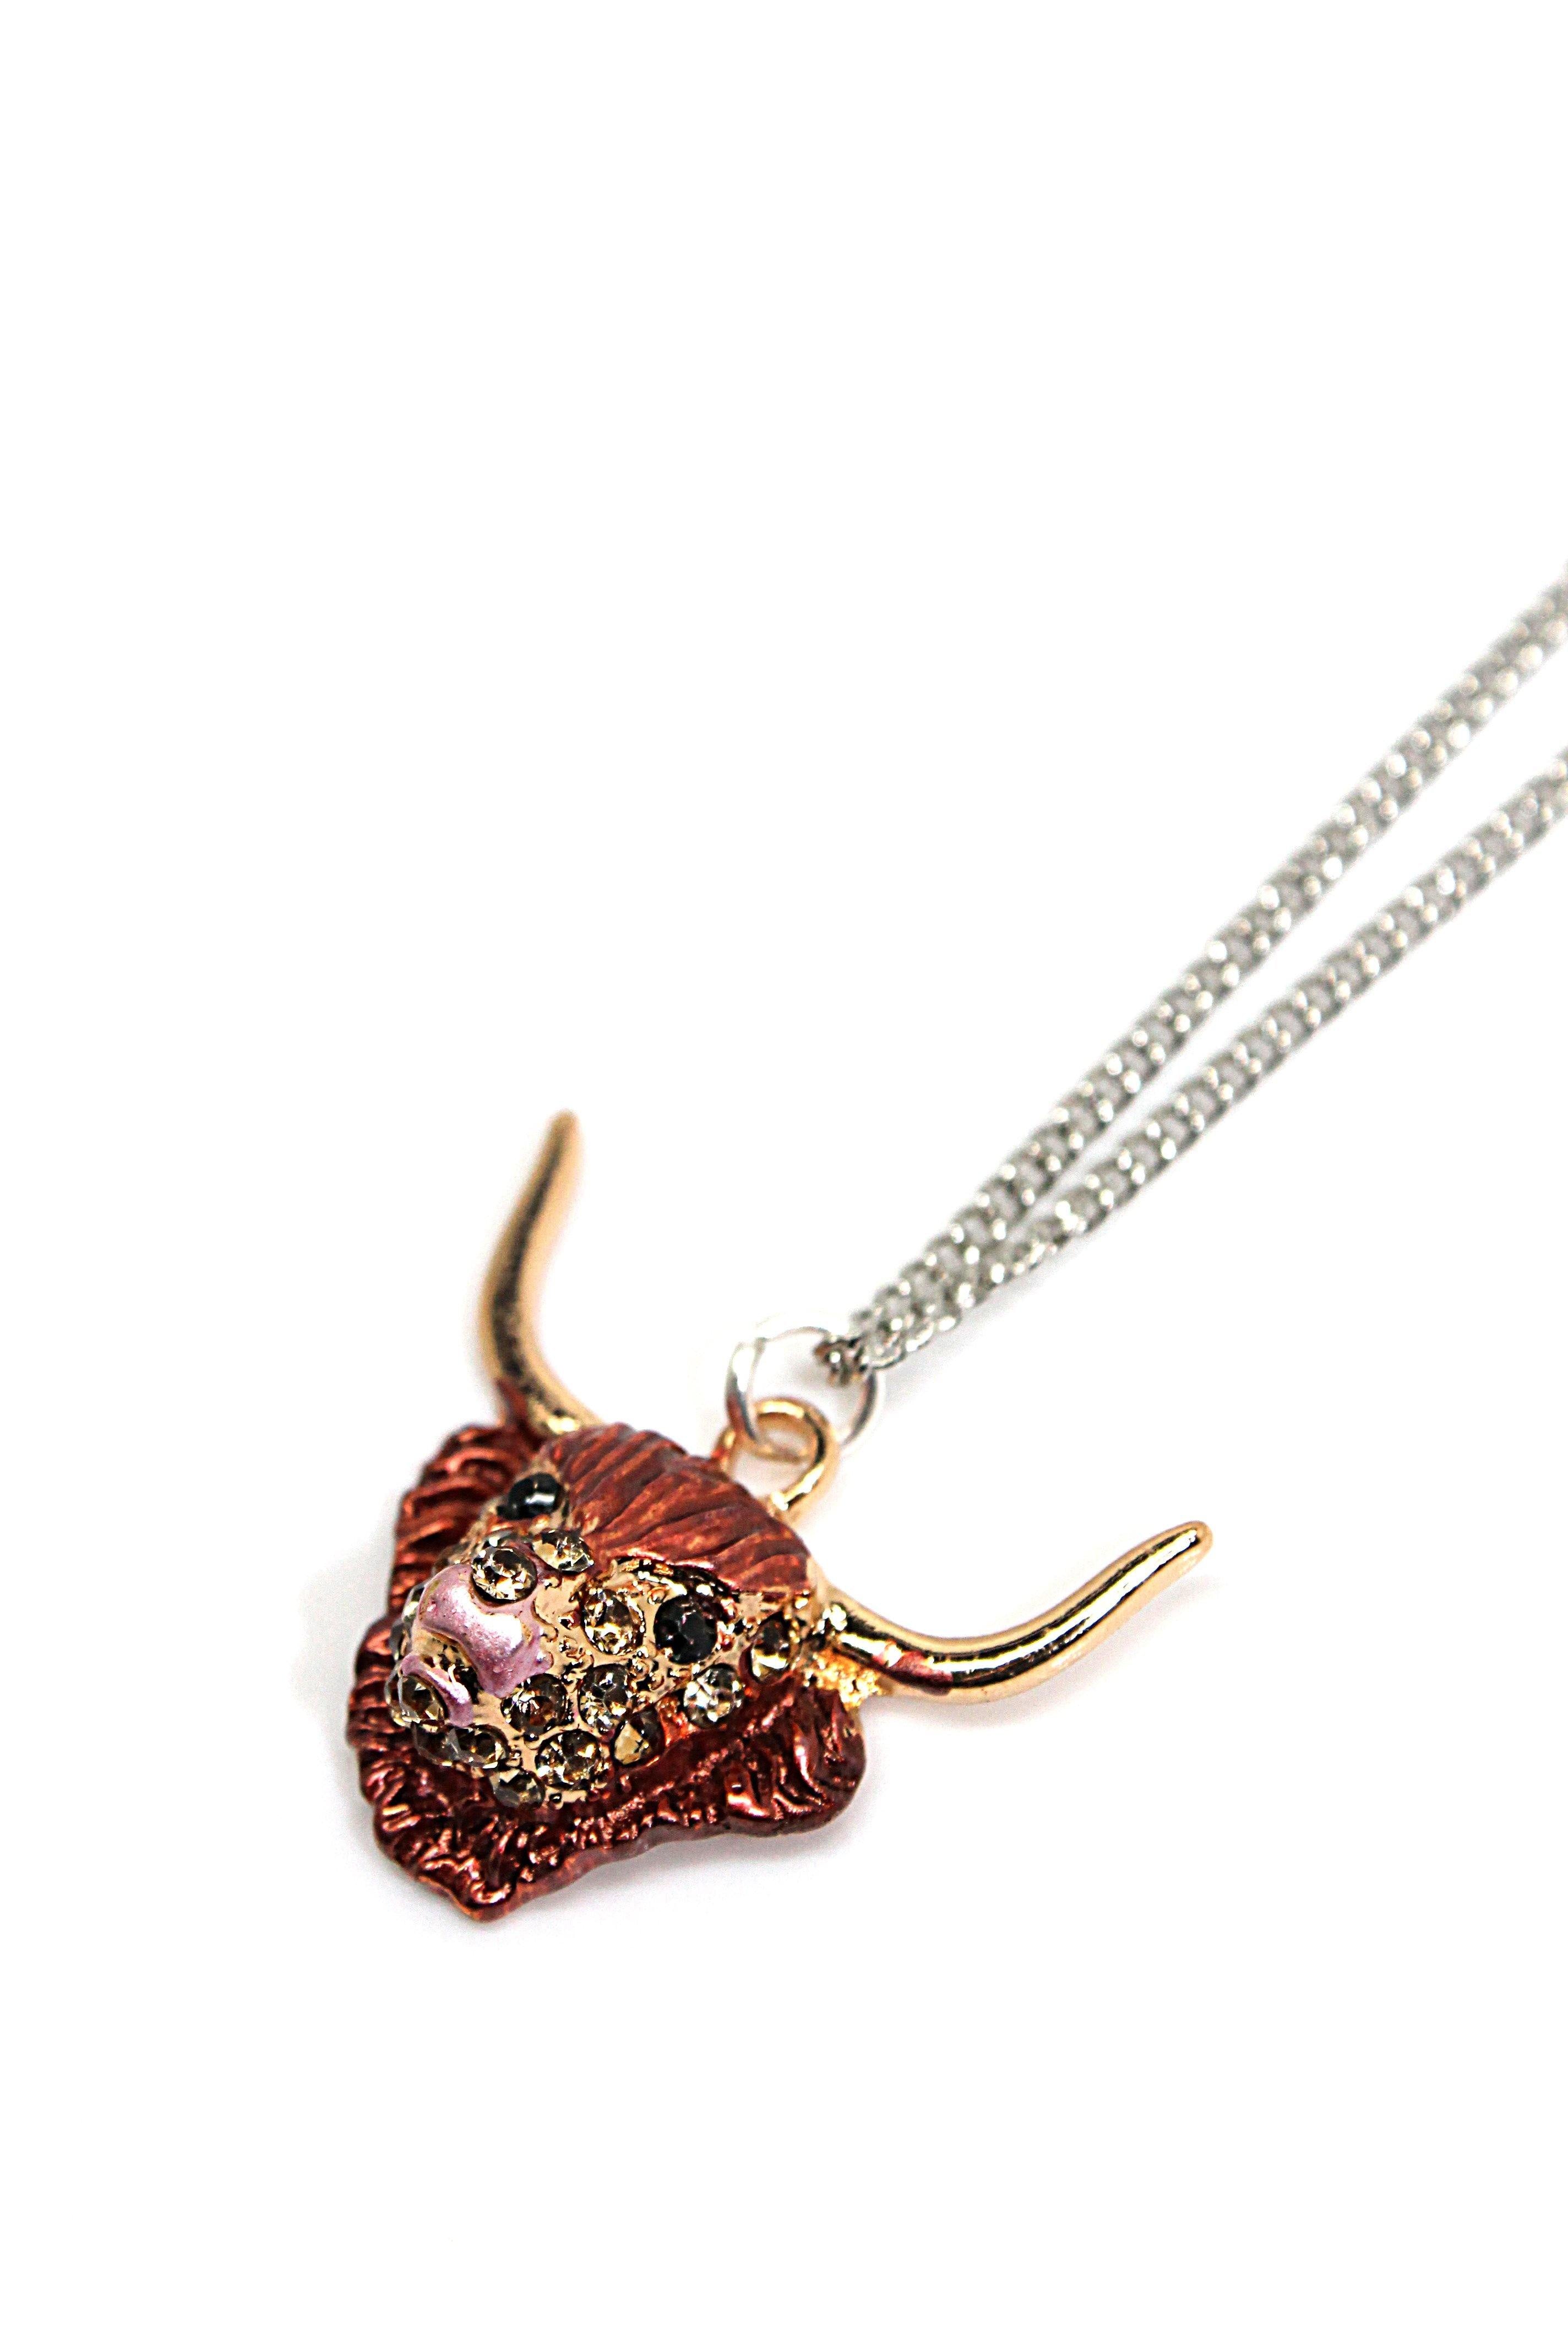 Highland Cow Necklace - Wildtouch - Wildtouch